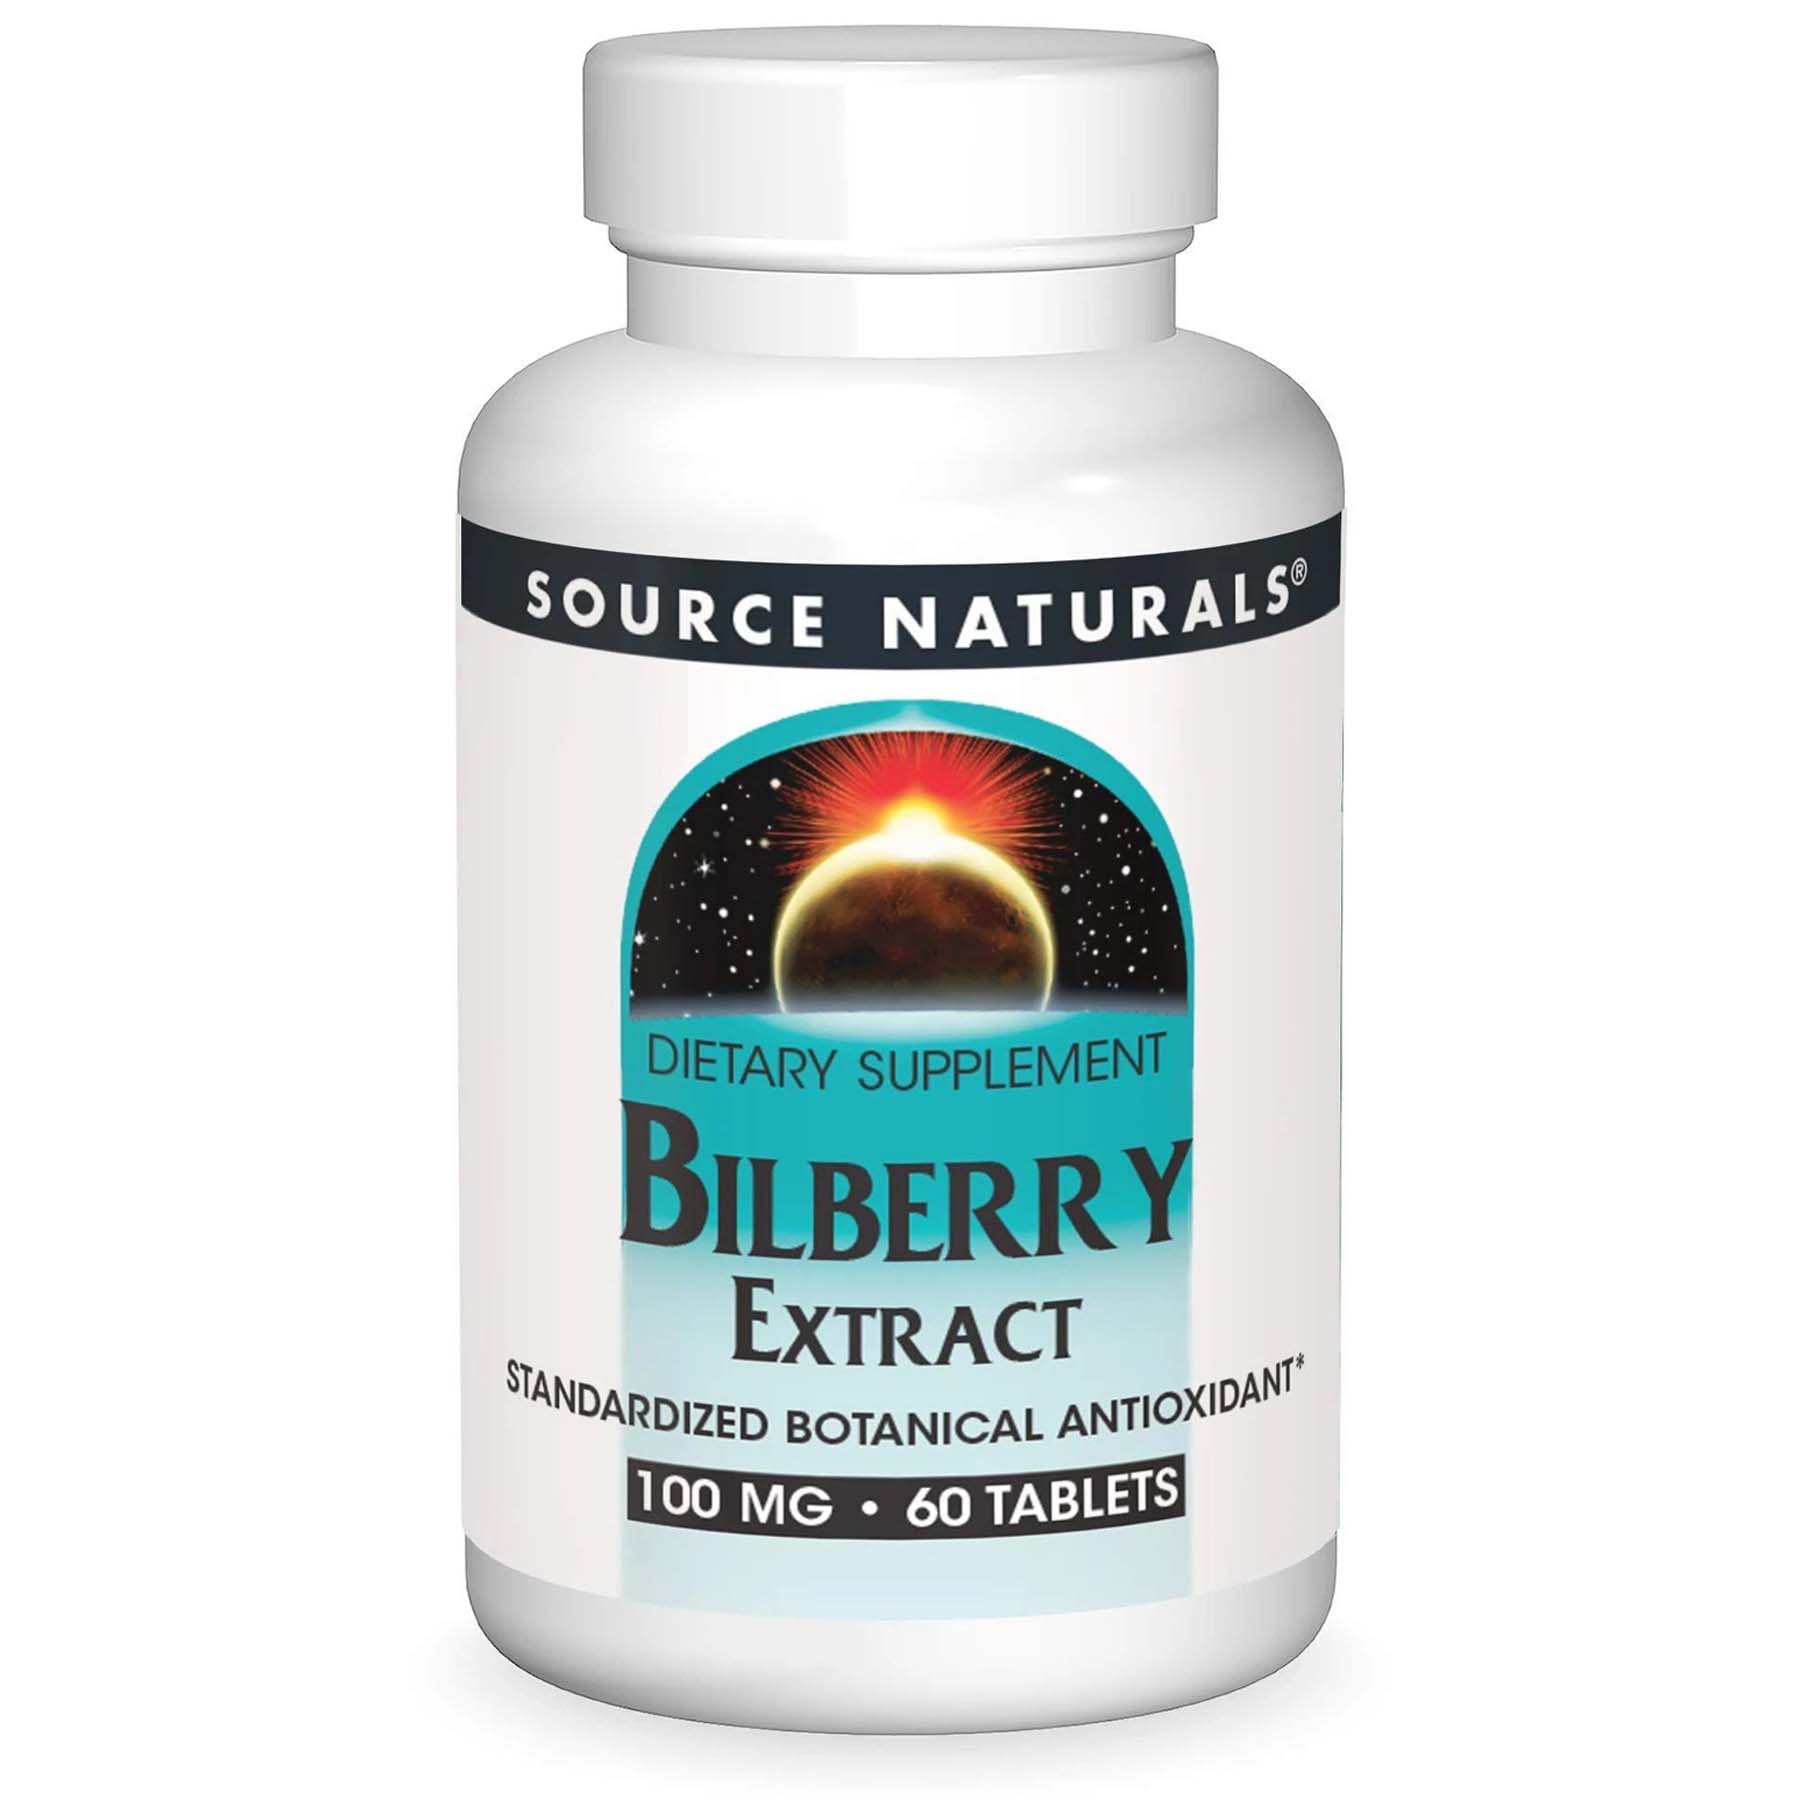 Source Naturals Bilberry Extract 60 Tablets 100 mg